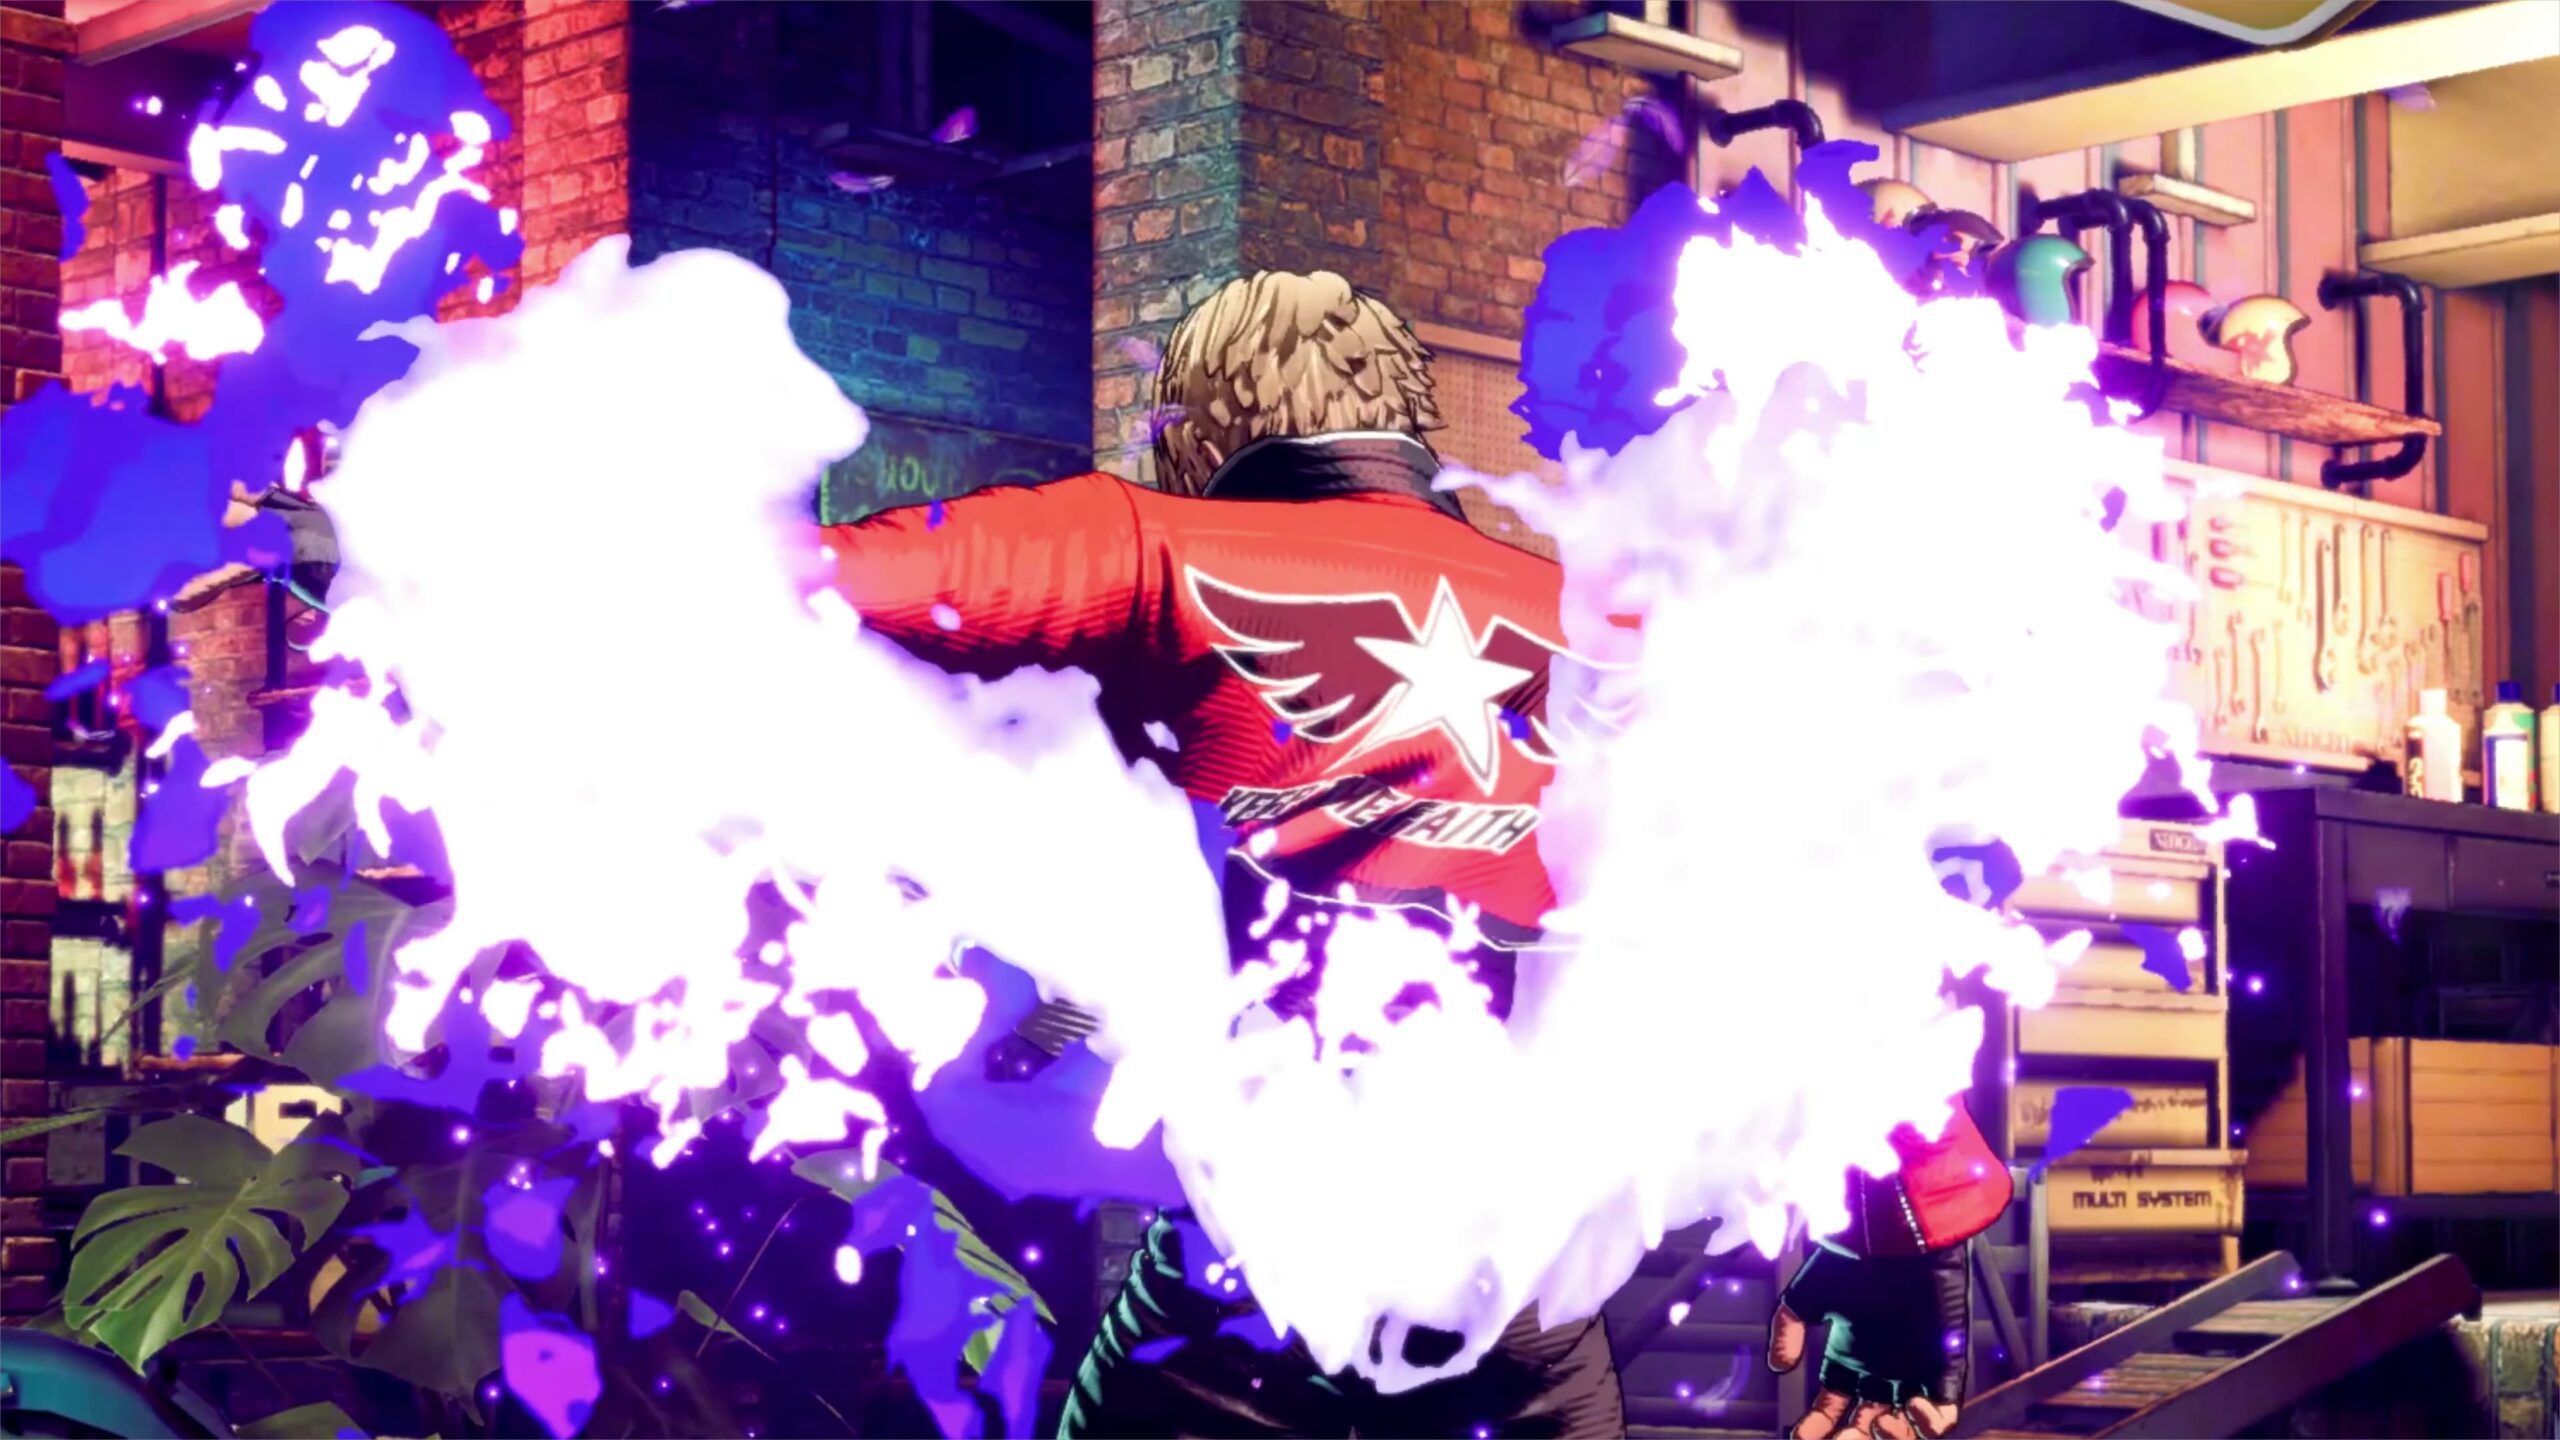 Fatal Fury: City of the Wolves - Official Teaser Trailer 